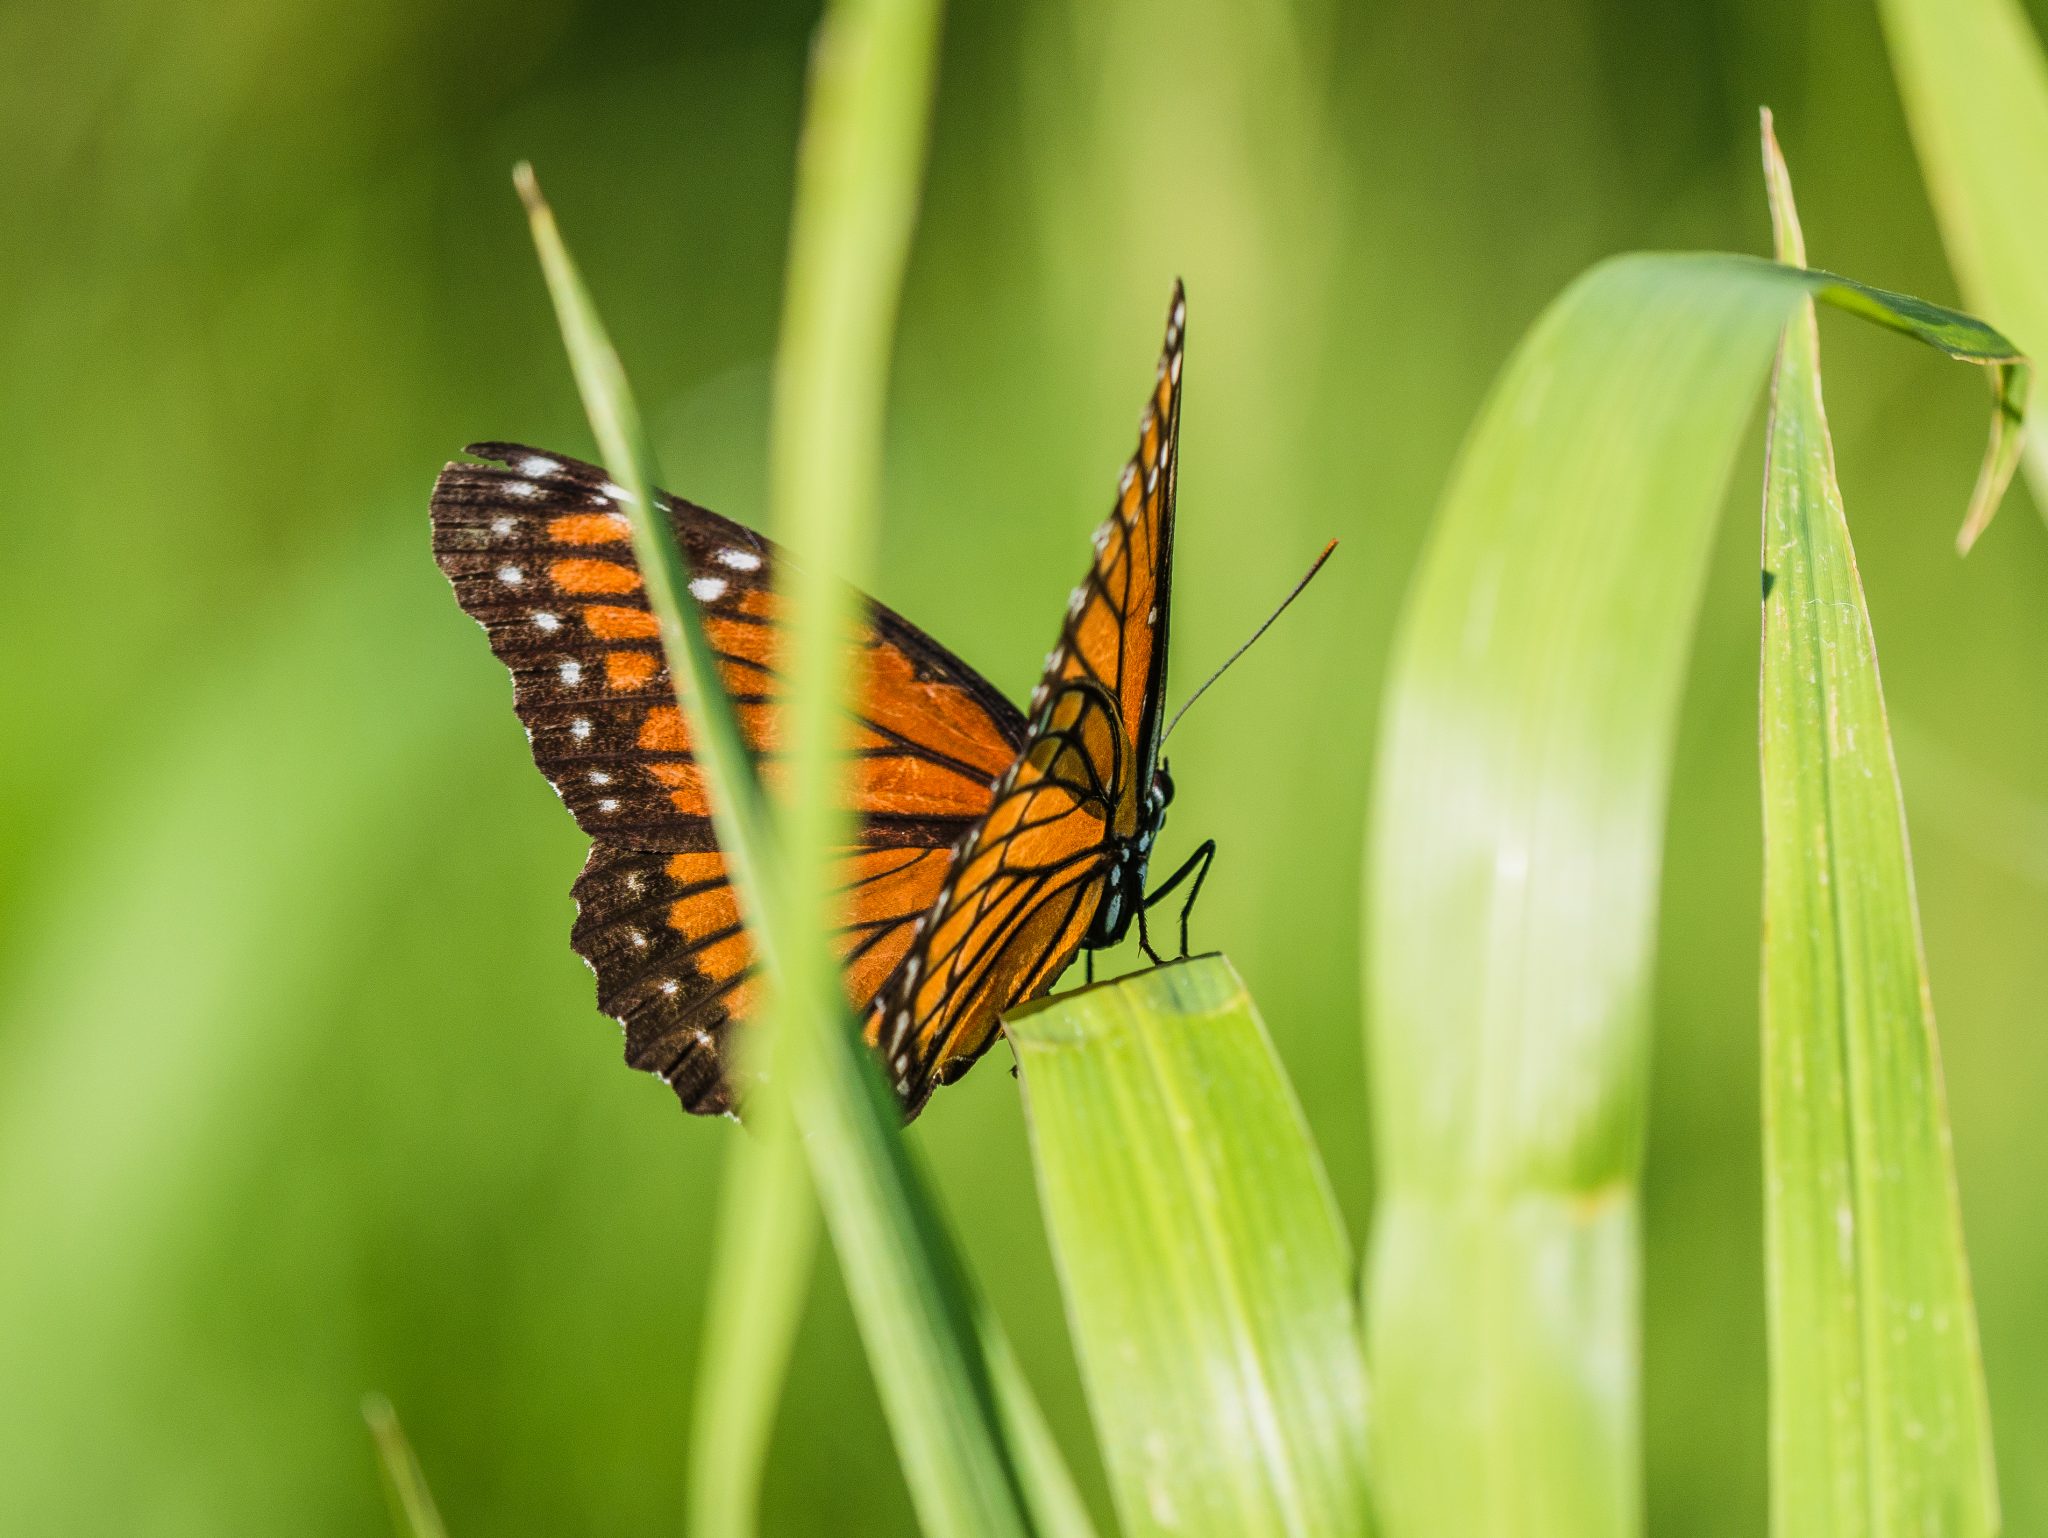 Orange butterfly sitting on a blade of grass